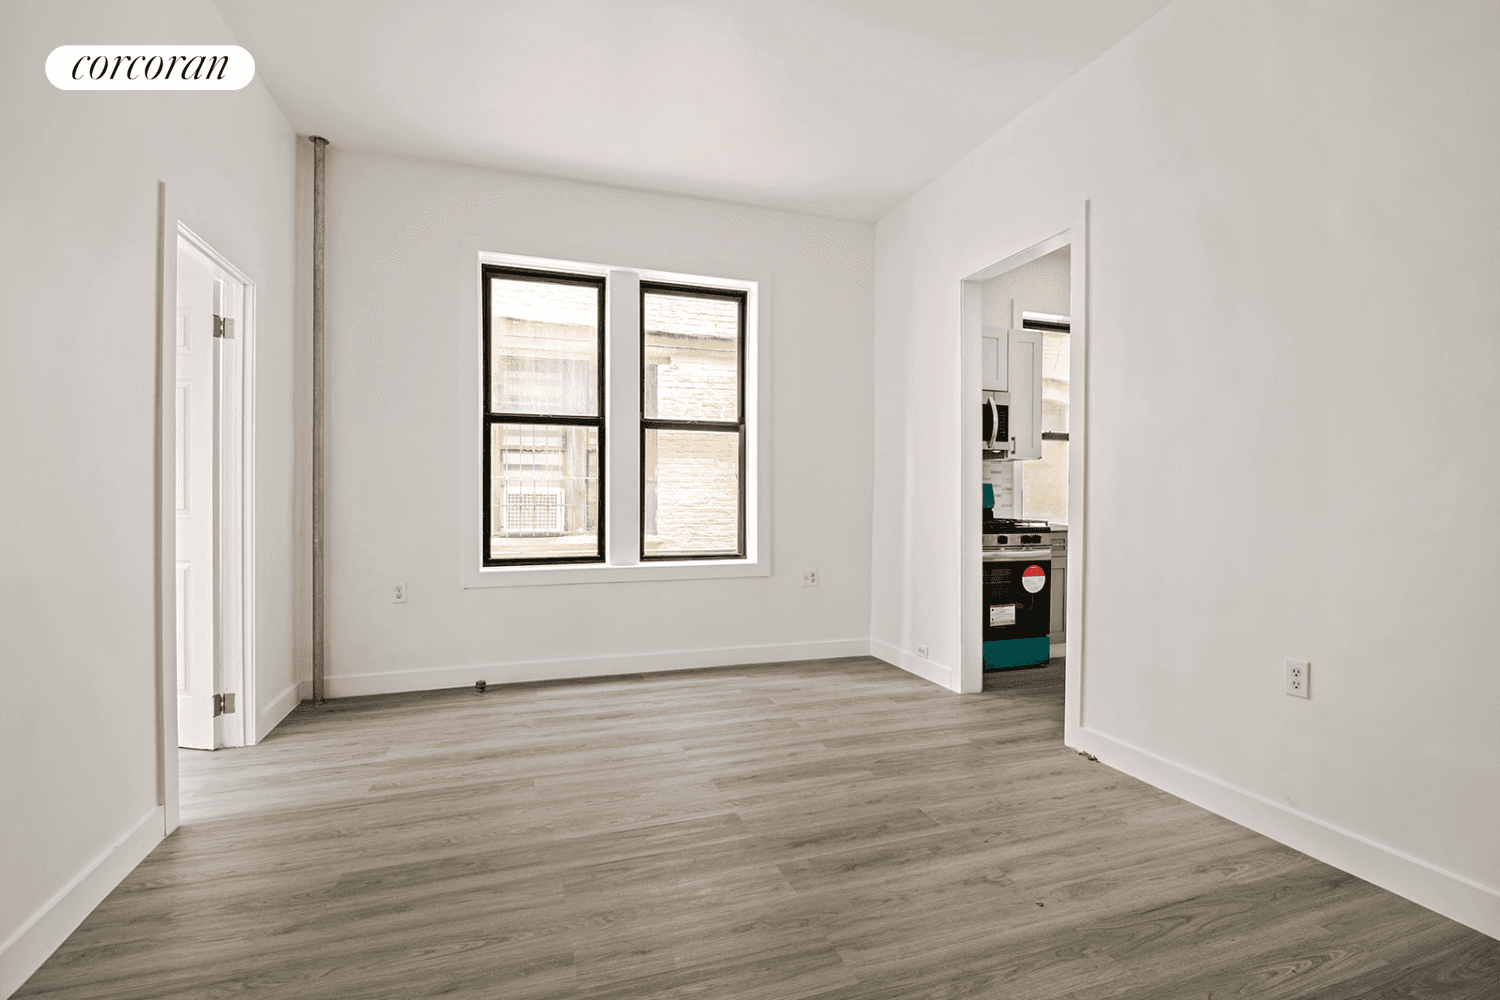 Newly renovated, spacious and move in ready 2 bedroom in beautiful Prospect Lefferts Gardens just a block and a half from Prospect Park and the subway !